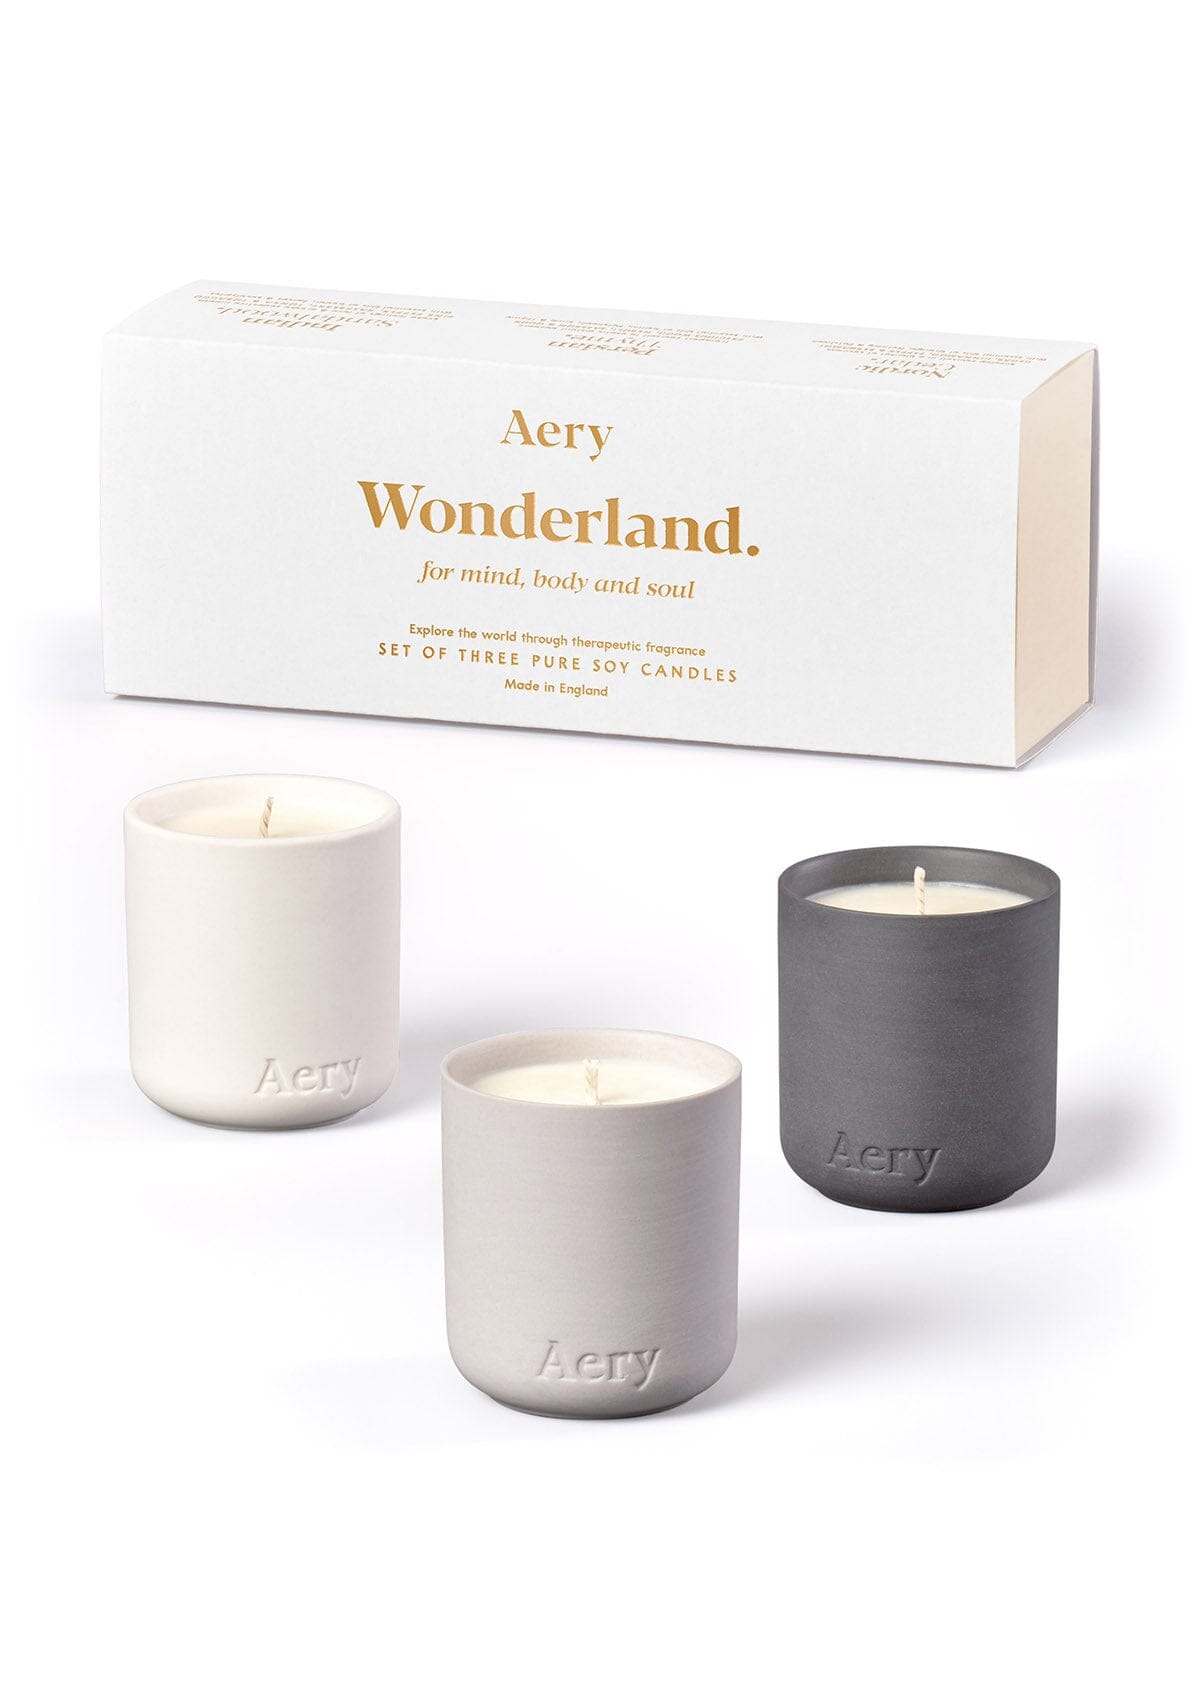 White Wonderland candle set of three displayed next to product packaging by Aery on white background 